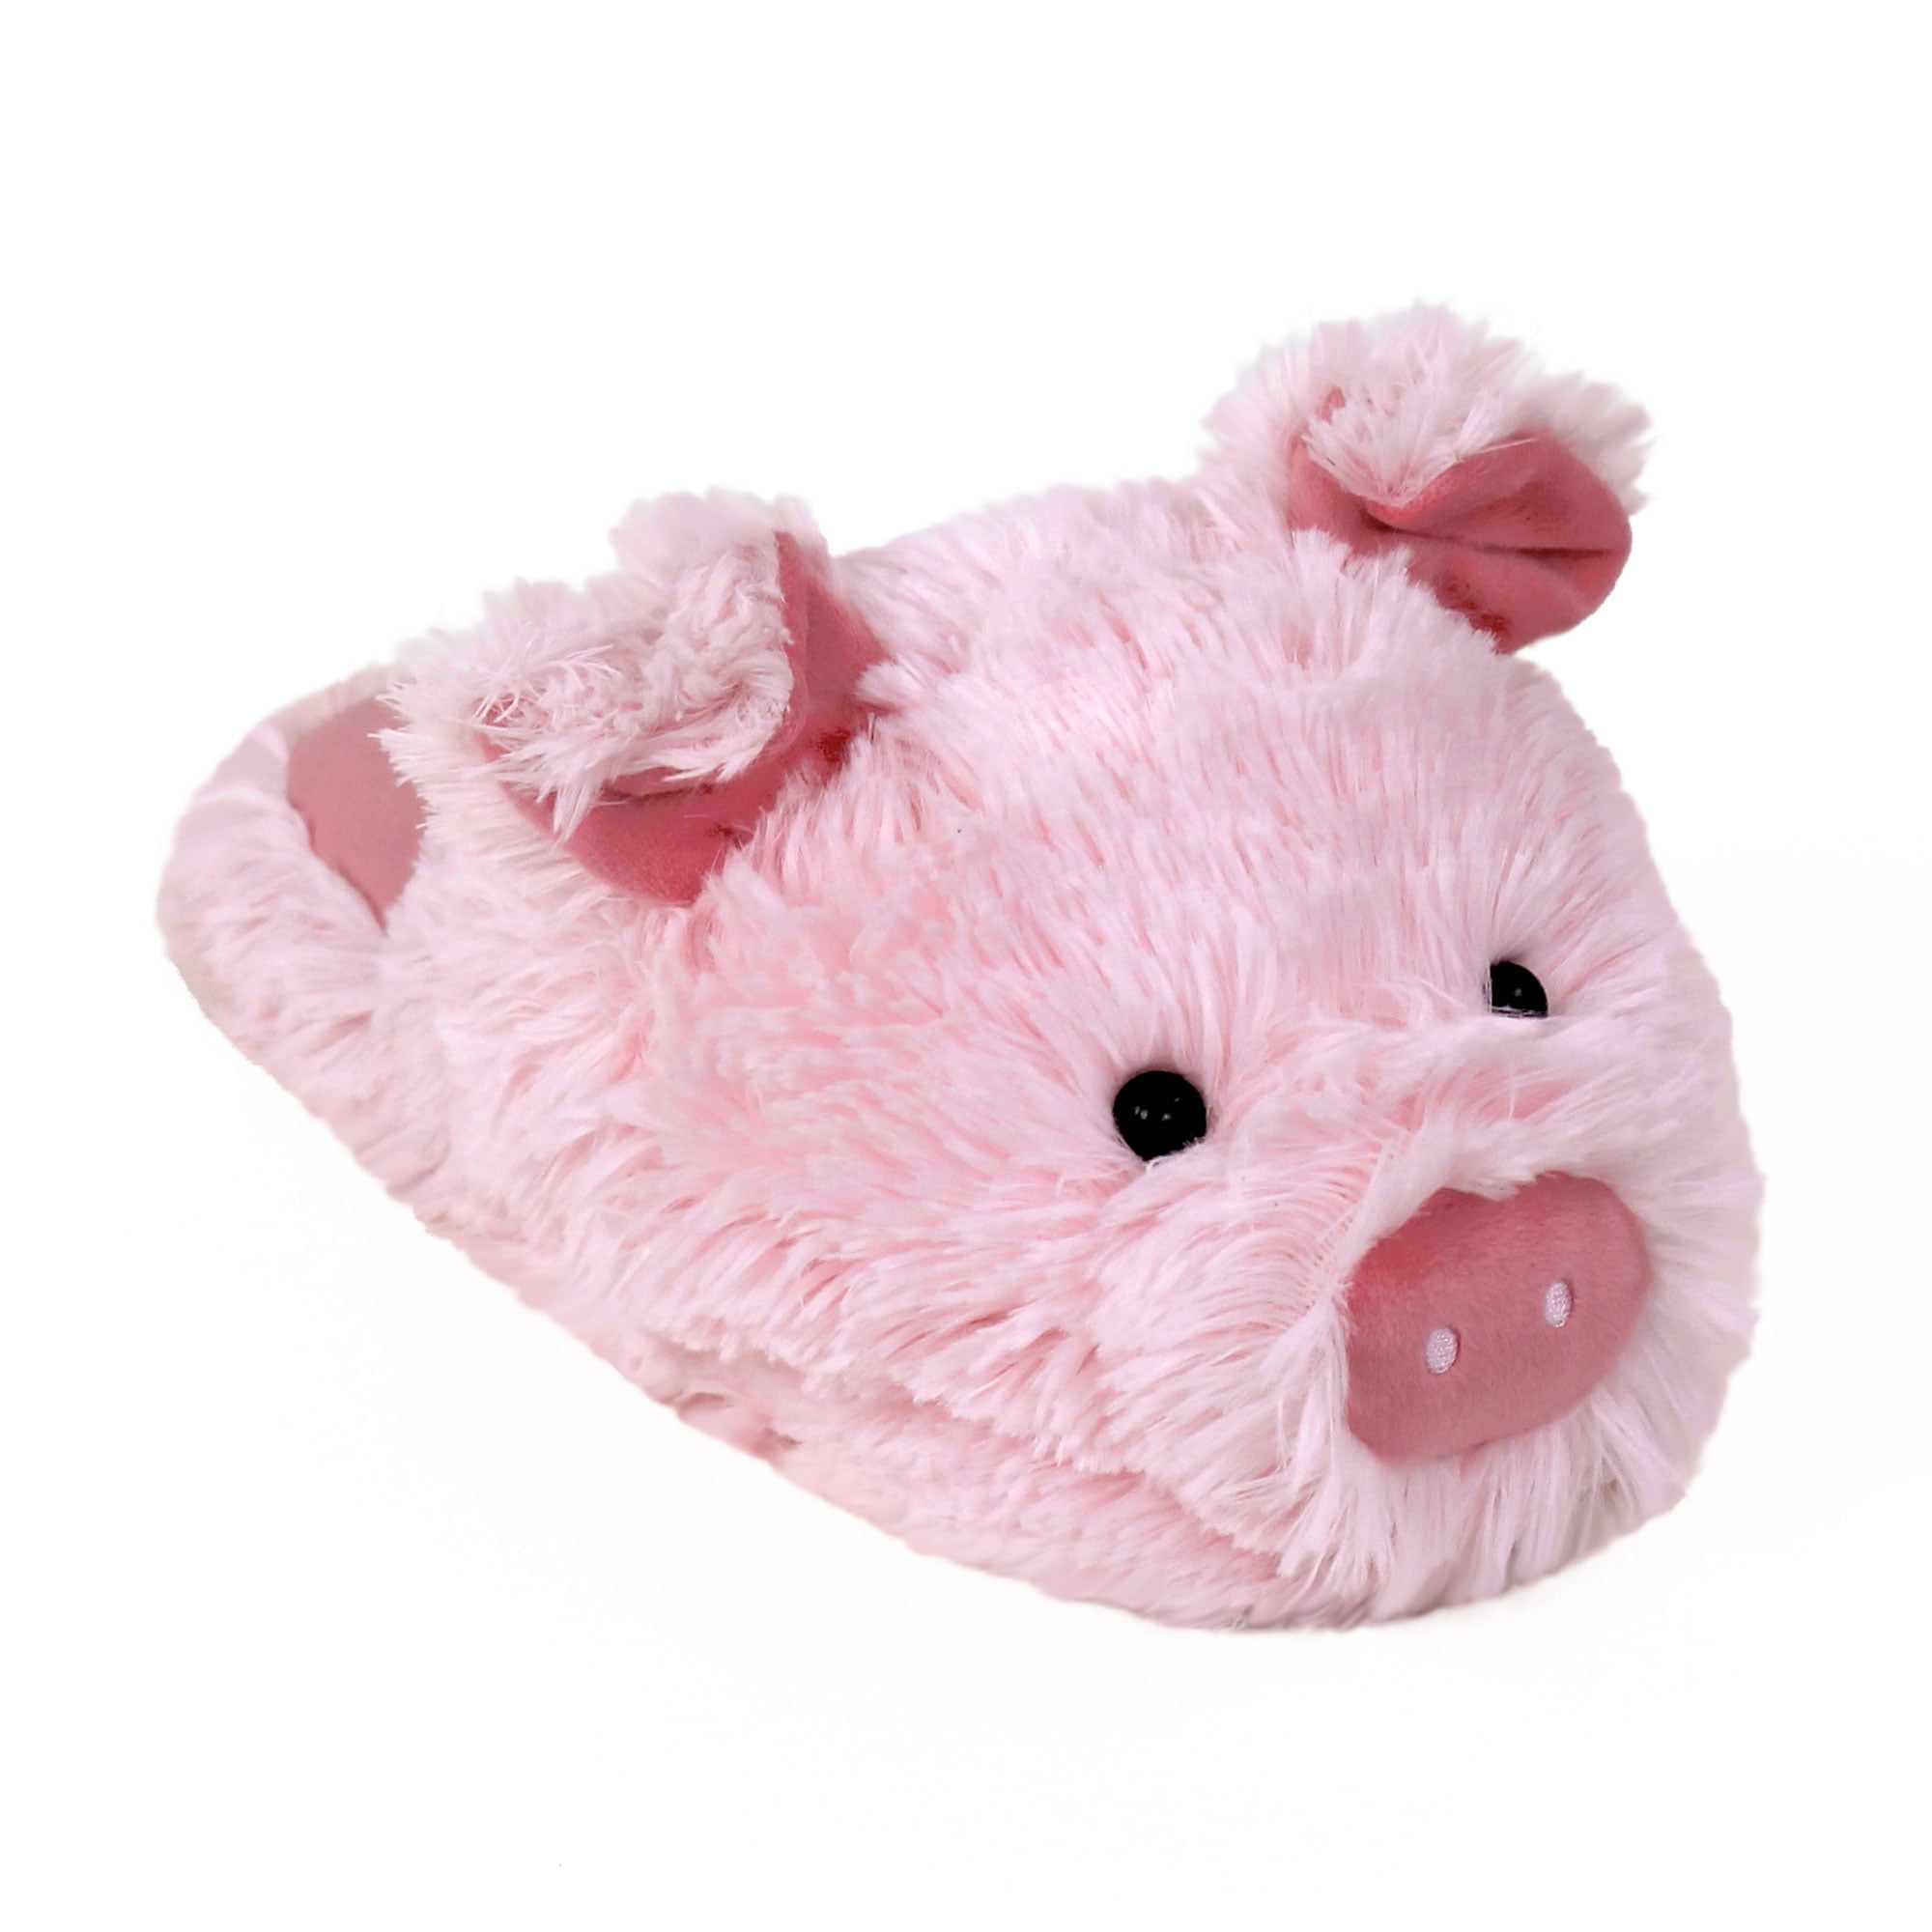 Fuzzy Pig Slippers - Pink for Adults Unisex One Size by Everberry - Walmart.com